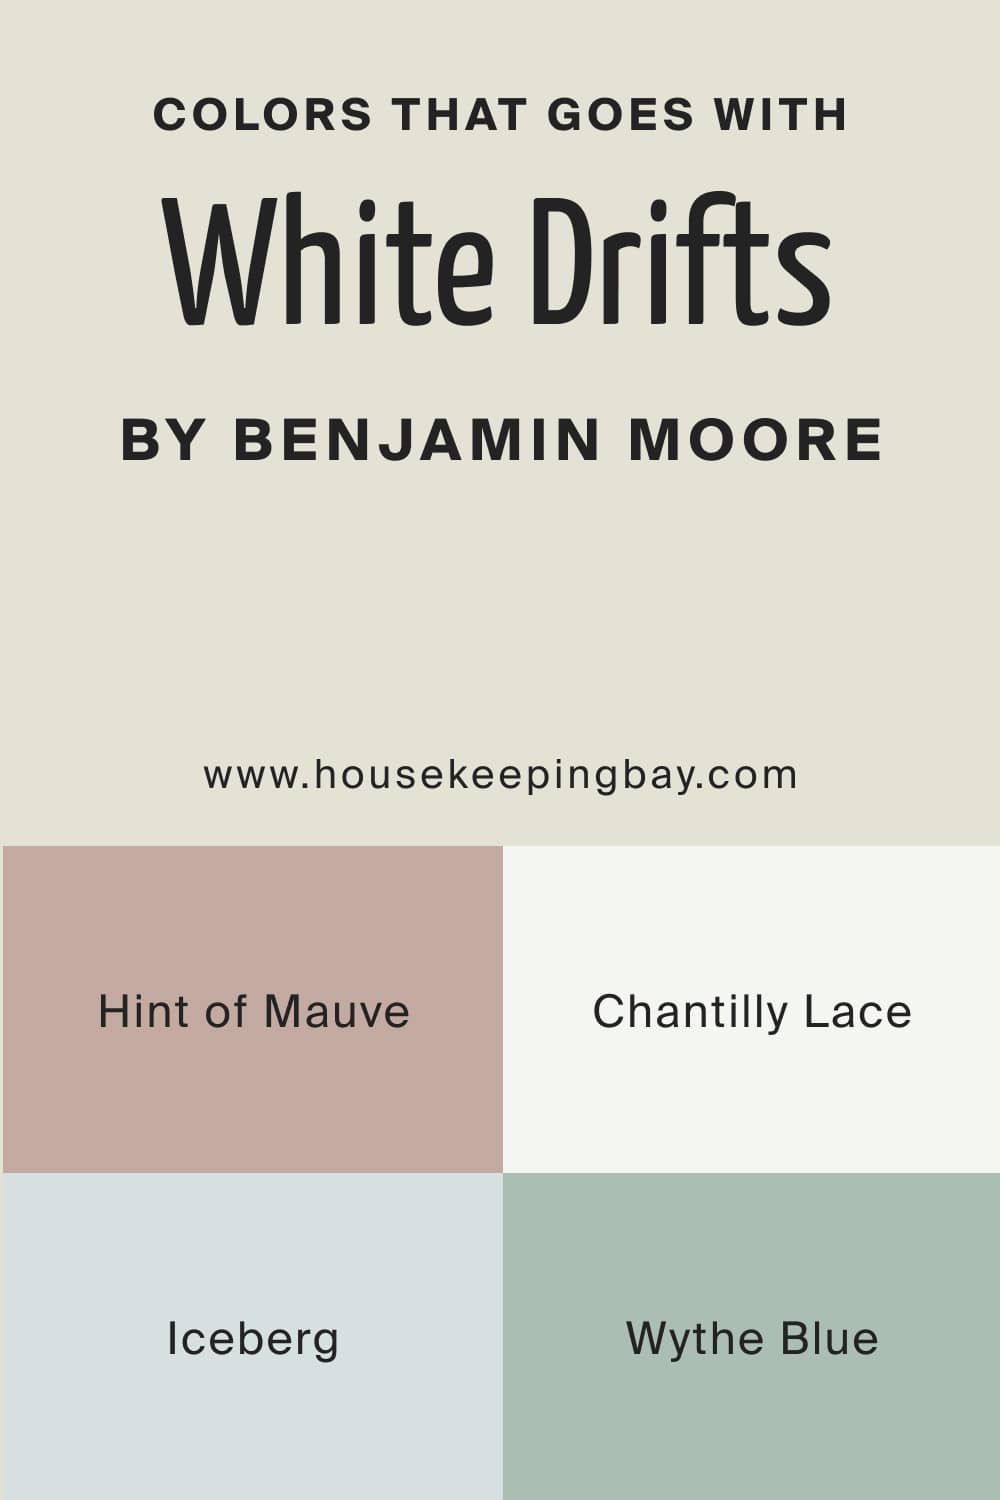 Colors that goes with White Drifts OC 138 by Benjamin Moore